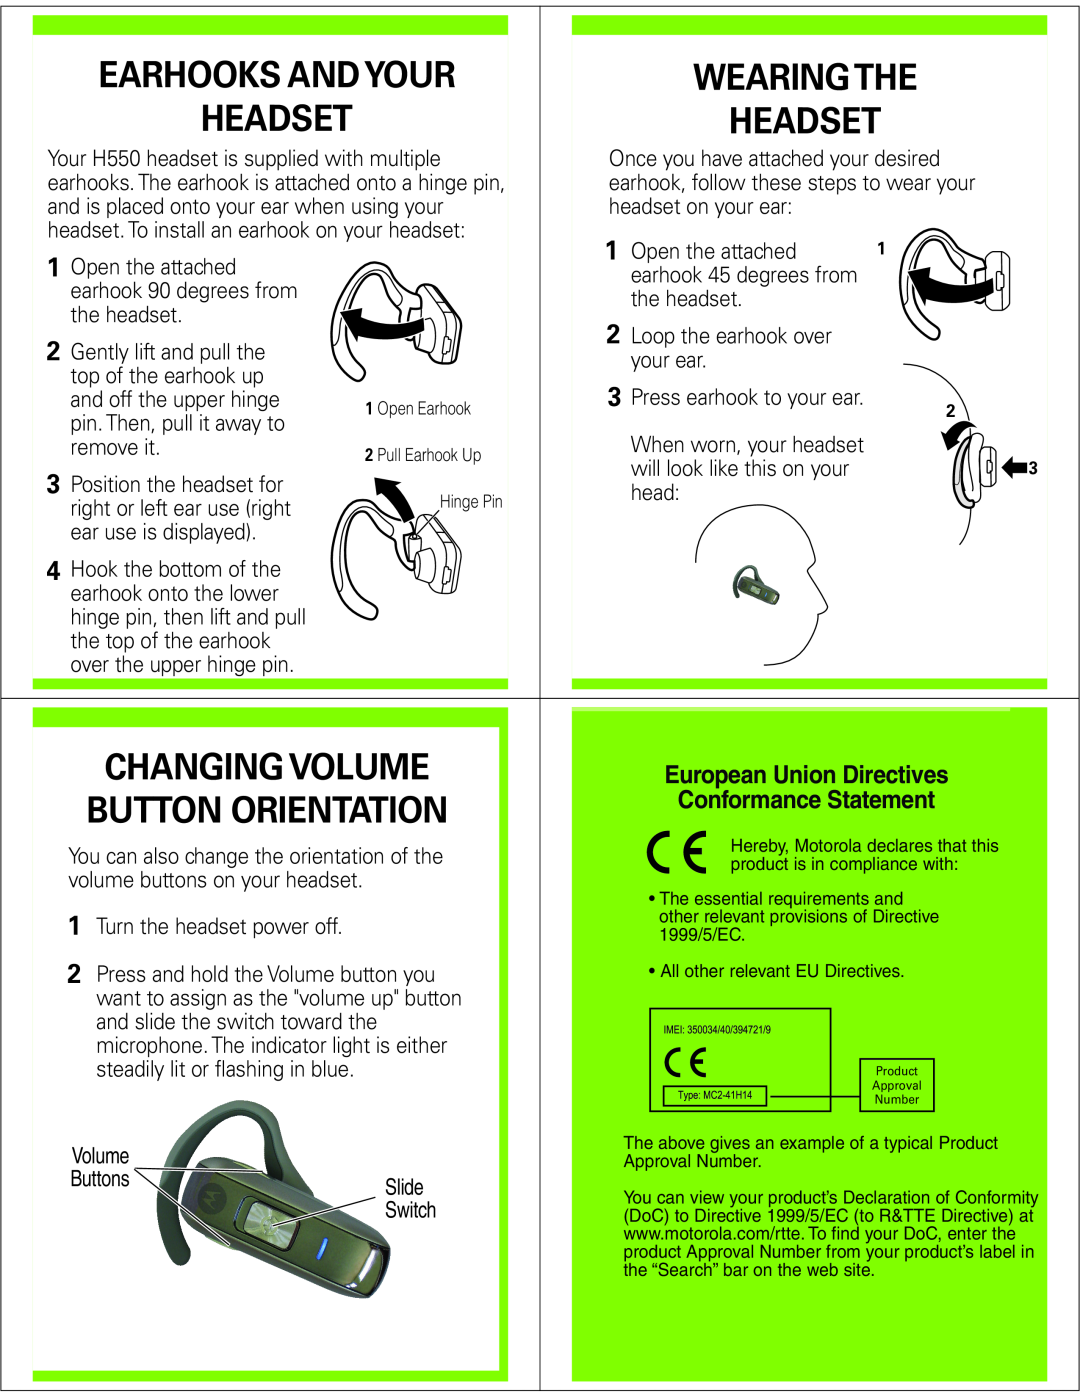 Motorola H550 Earhooks And Your, Wearing The, Headset, Changing Volume, Button Orientation, European Union Directives 